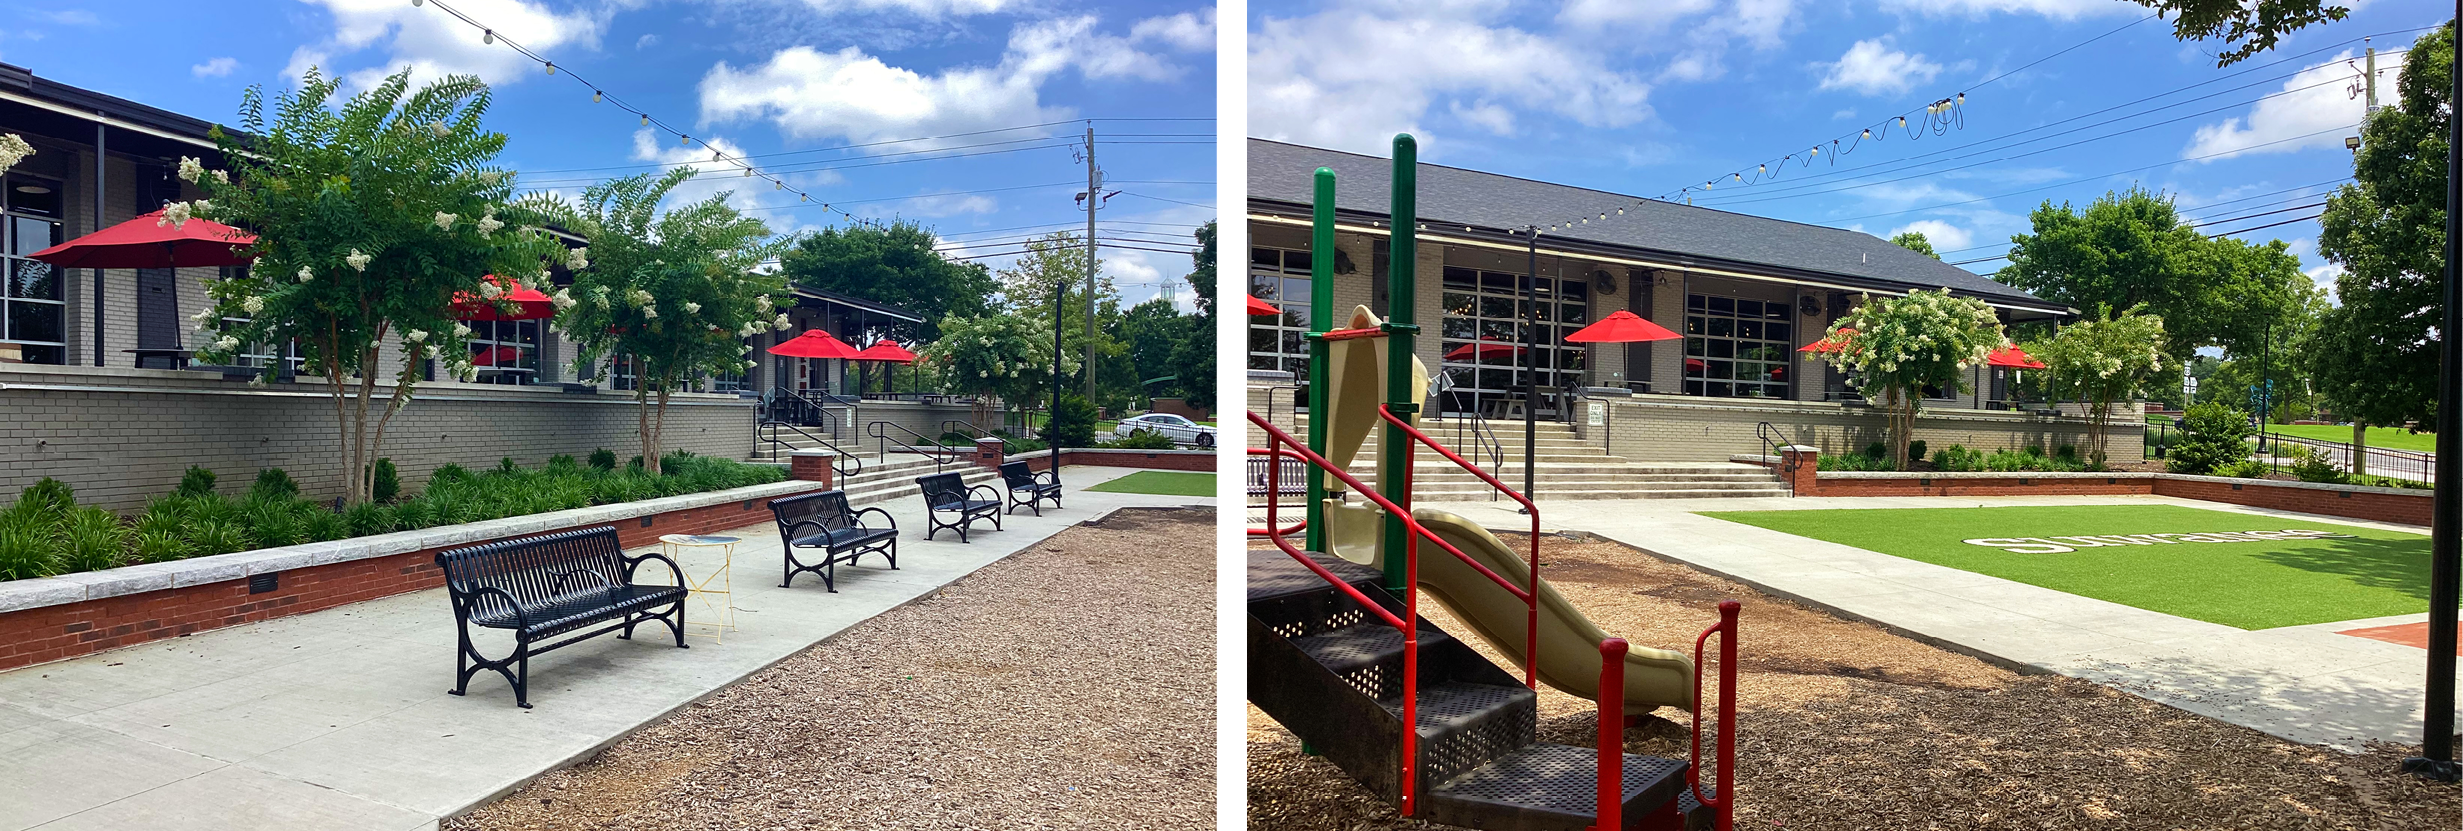 two images of the Suwanee Station Park side by side. On the left is metal benches with large flowering trees behind them and tables with umbrellas in the background. On the right is A grassy courtyard that reads "Suwanee" next to a playground.